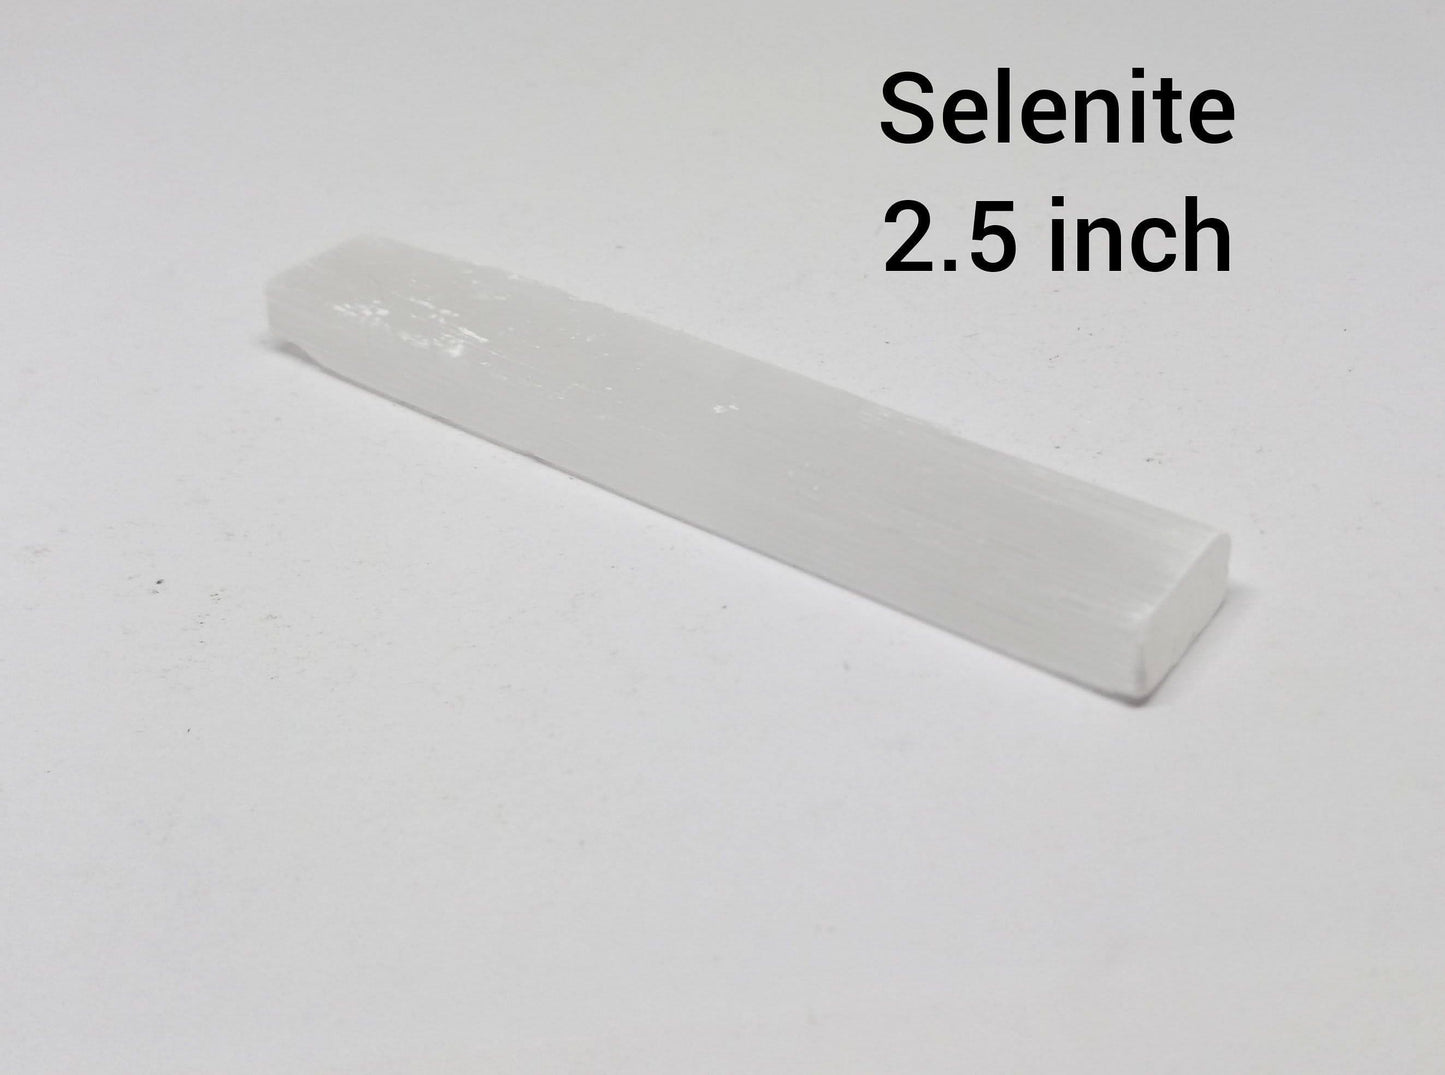 Selenite Natural Crystal Stick Shield-Cleanse-Protect-Charge 3.5inch or 2.5inch - Guiding Lights Boutique